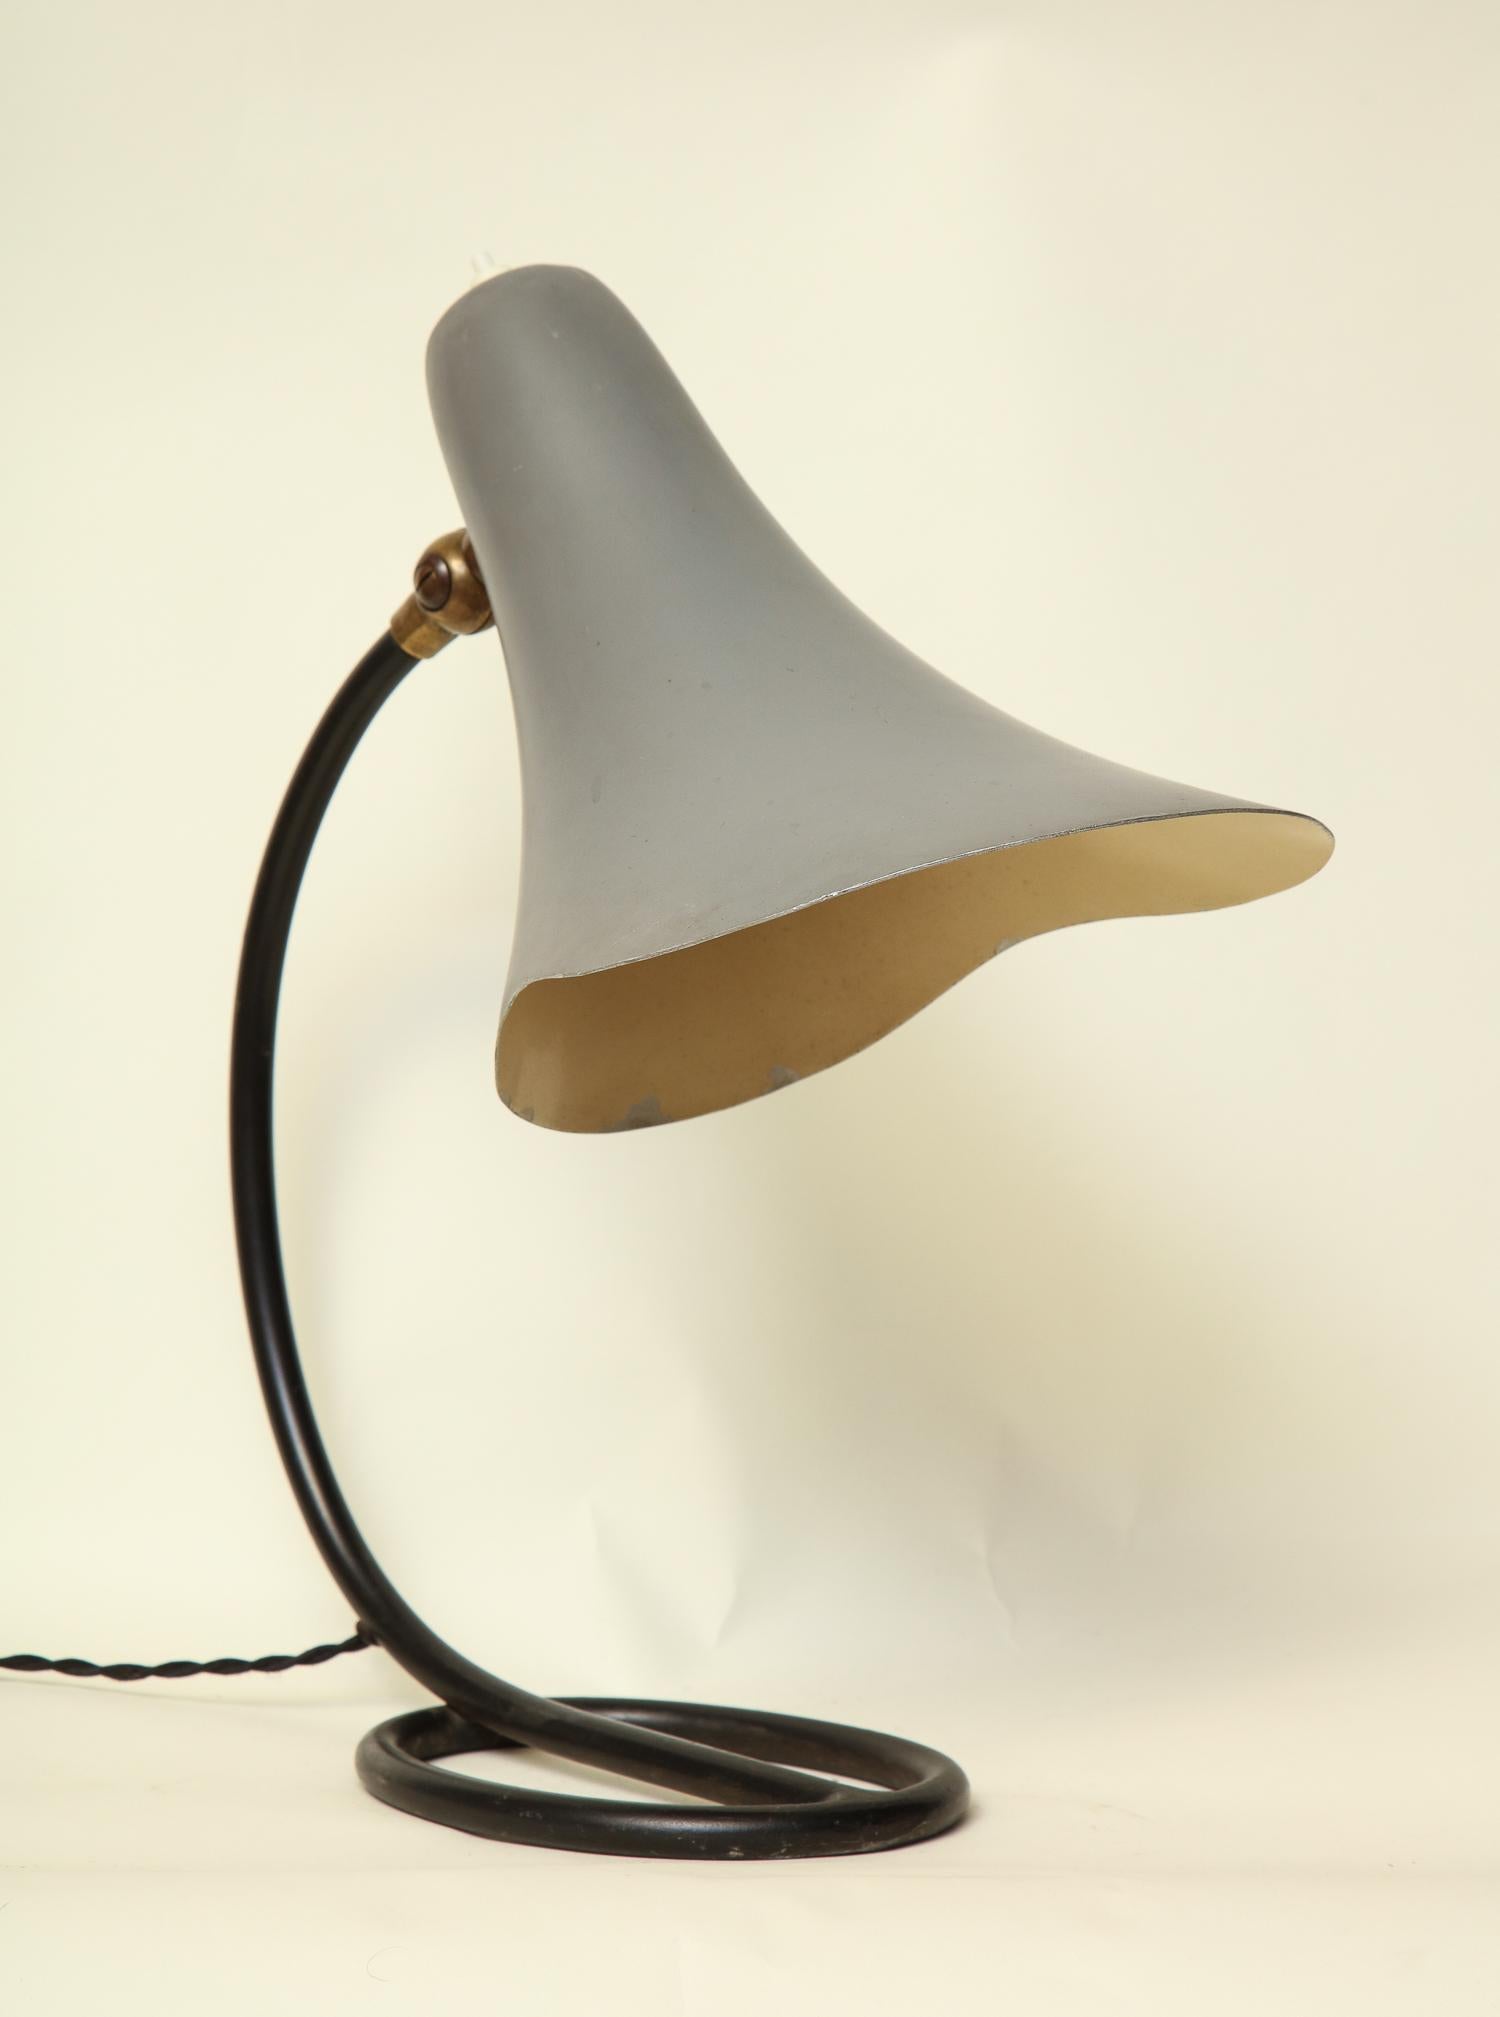 Articulated Table Lamp Mid-Century Modern Painted Metal Shade Adjusts Italy 1950 For Sale 8